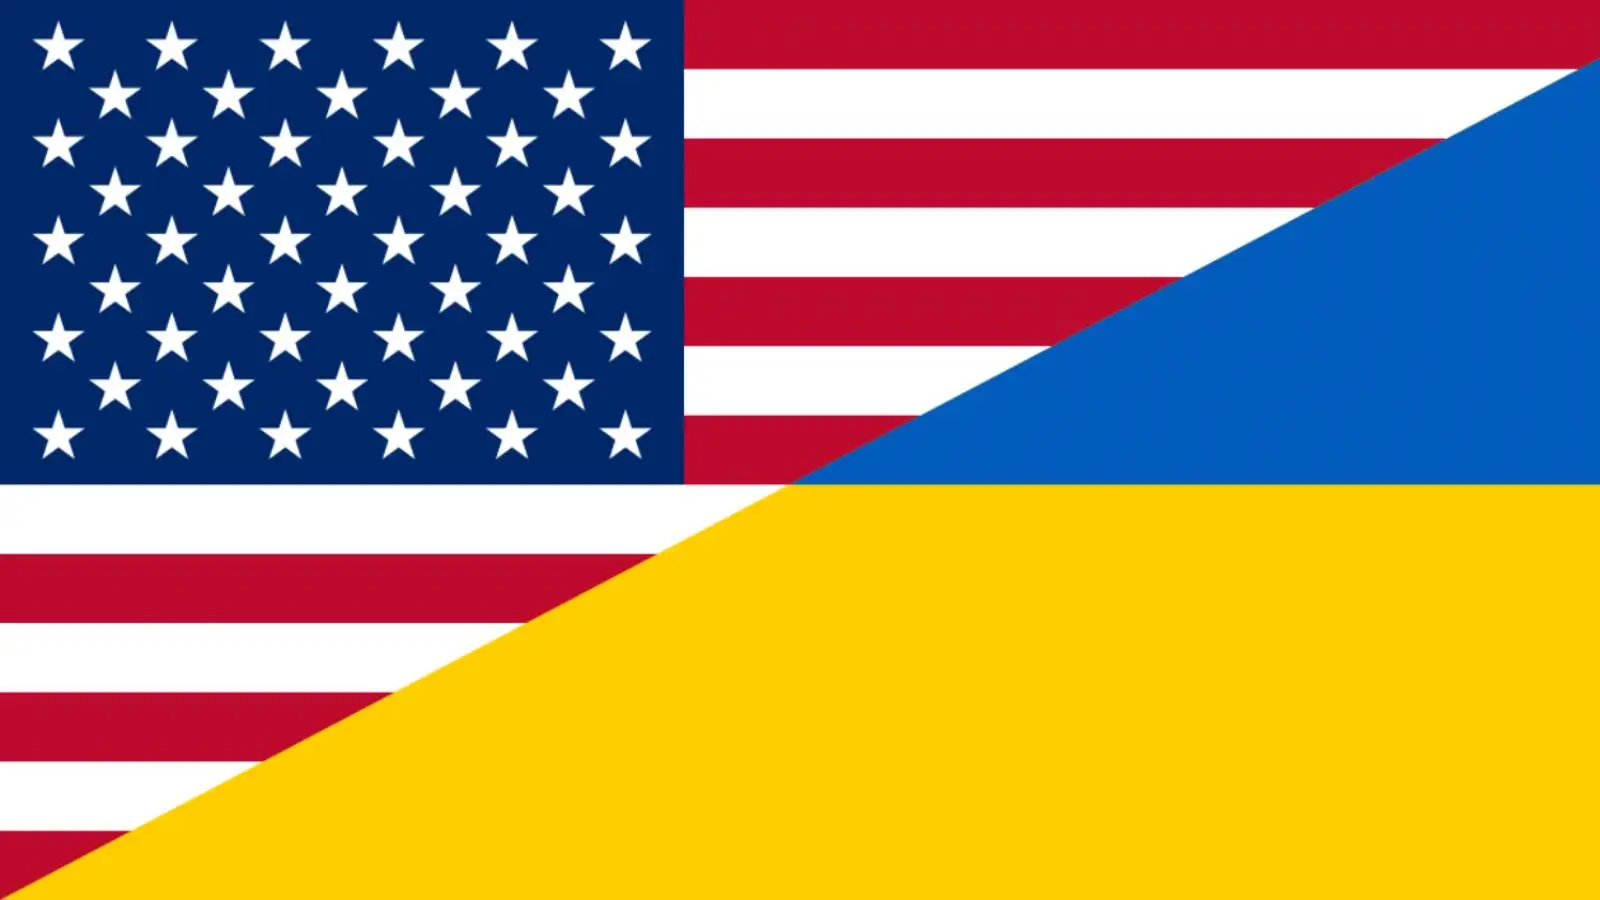 The USA was surprised by Ukraine's decision to request NATO membership